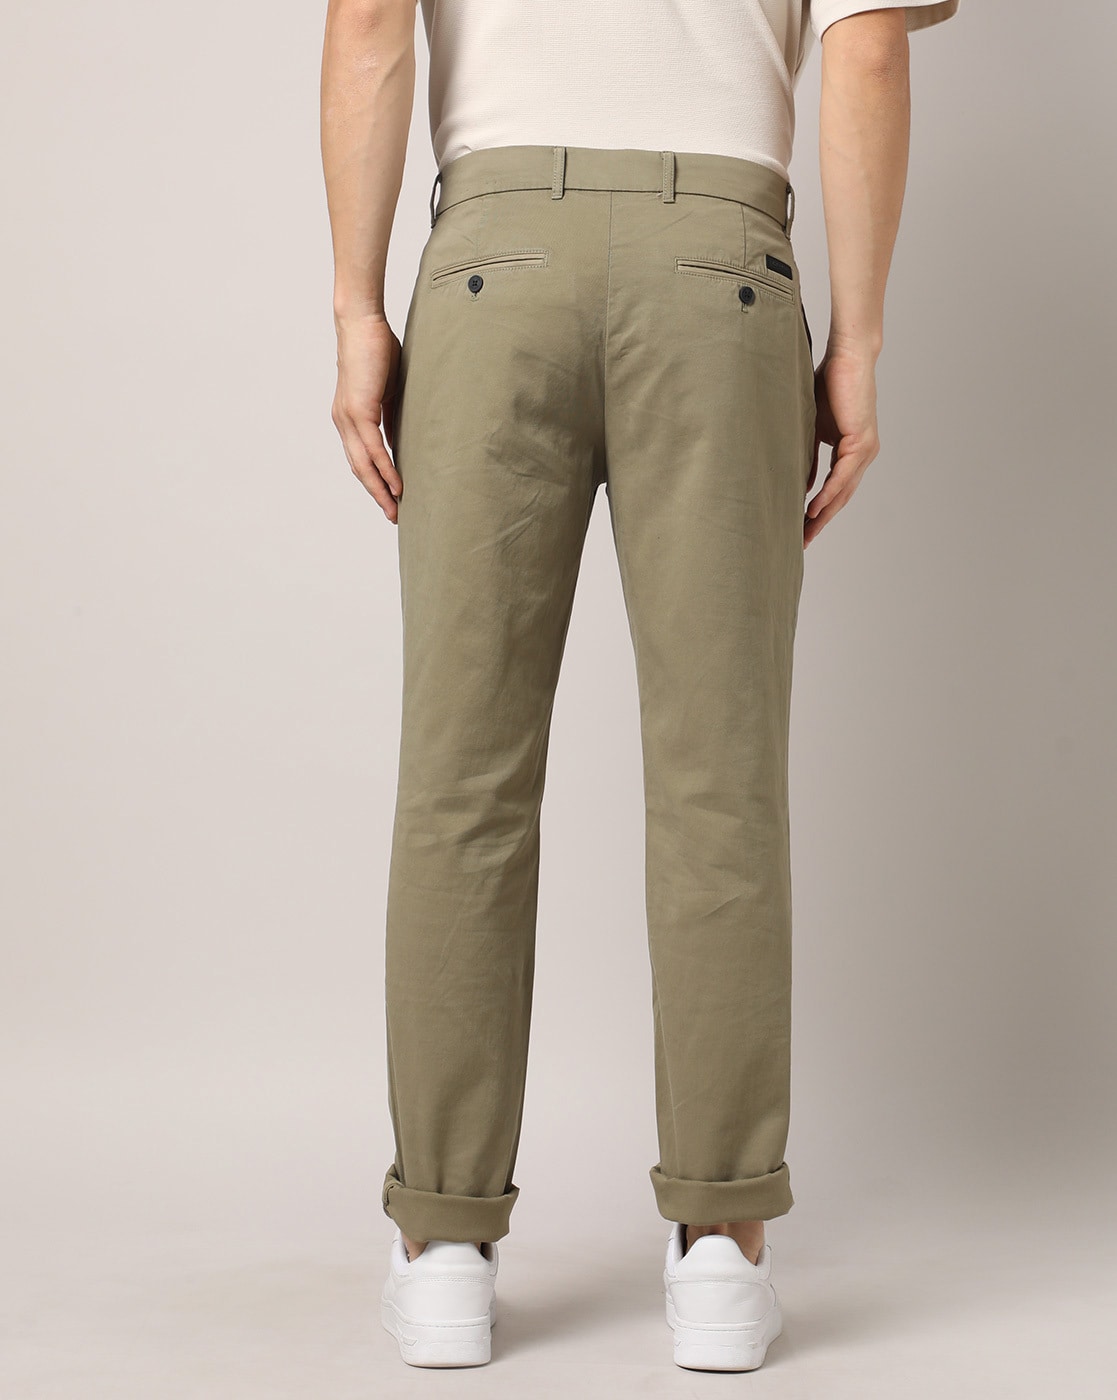 Peter England Jeans Trousers  Chinos Peter England Olive Casual Trousers  for Men at Peterenglandcom